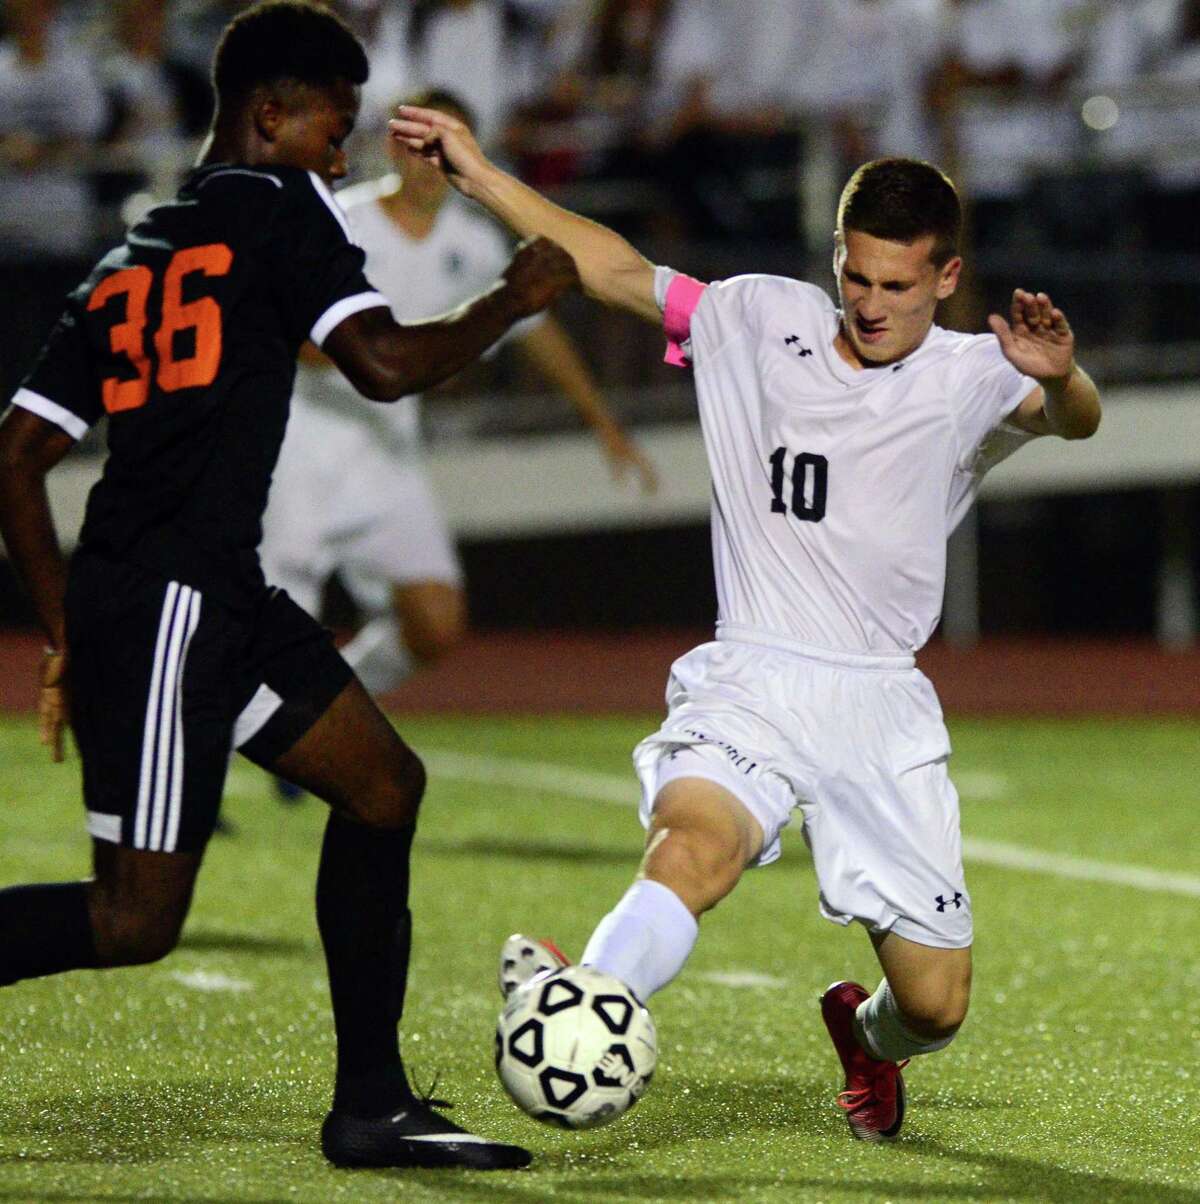 Trumbull’s Nicholas Moussavian reaches the ball as Stamford’s Emmanuel Moran tries to intercept on Wednesday in Trumbull.